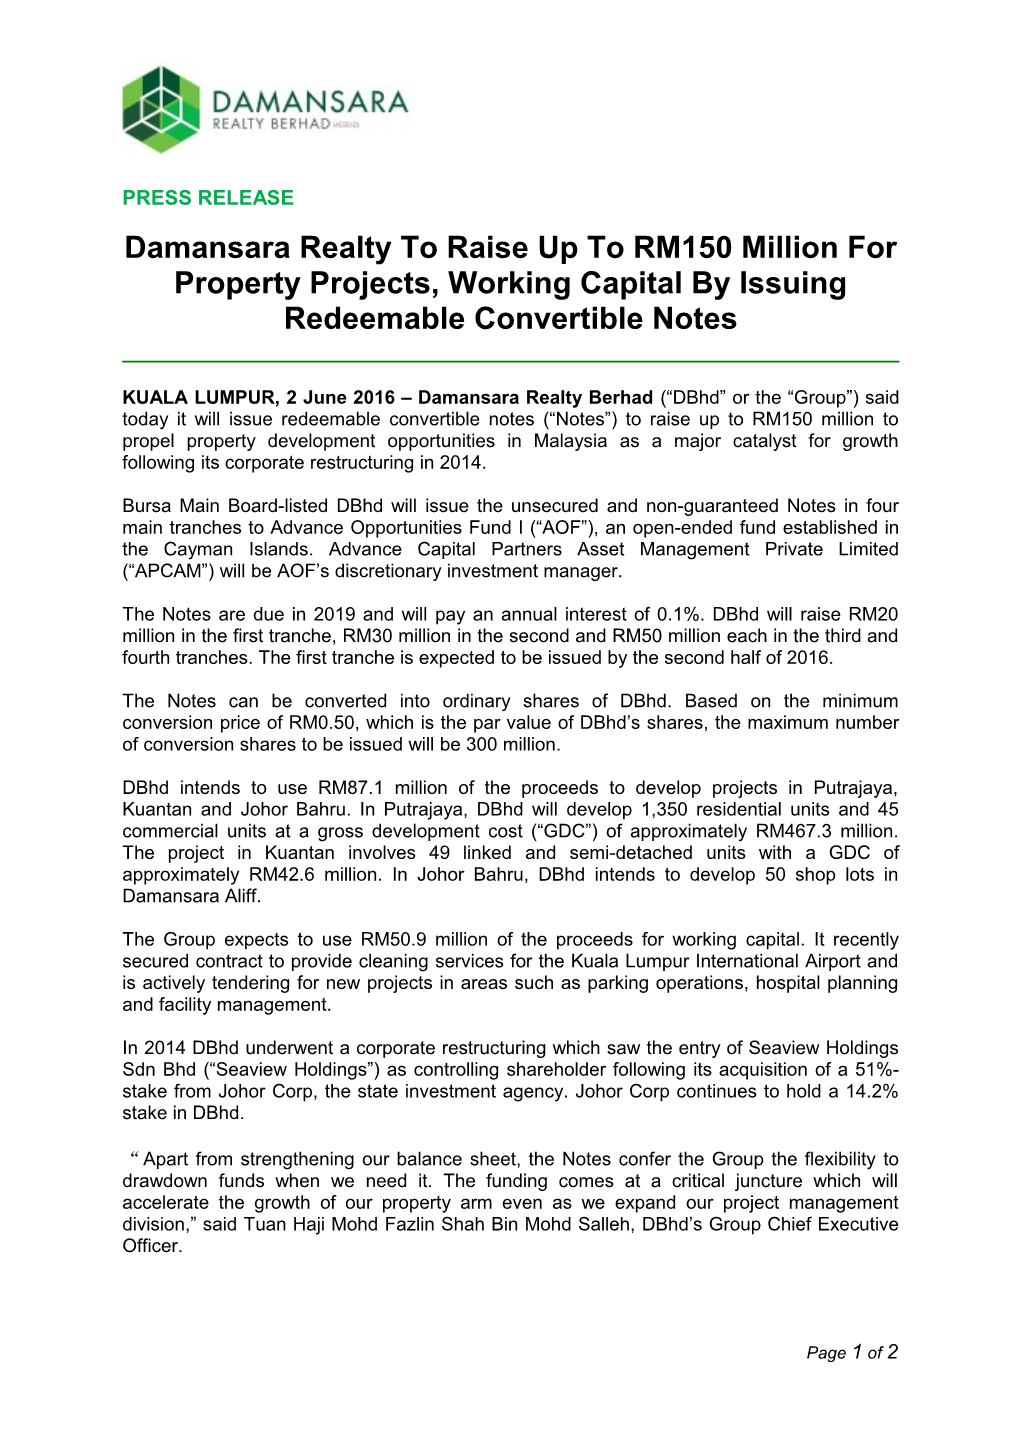 Damansara Realty to Raise up to RM150 Million for Property Projects, Working Capital By